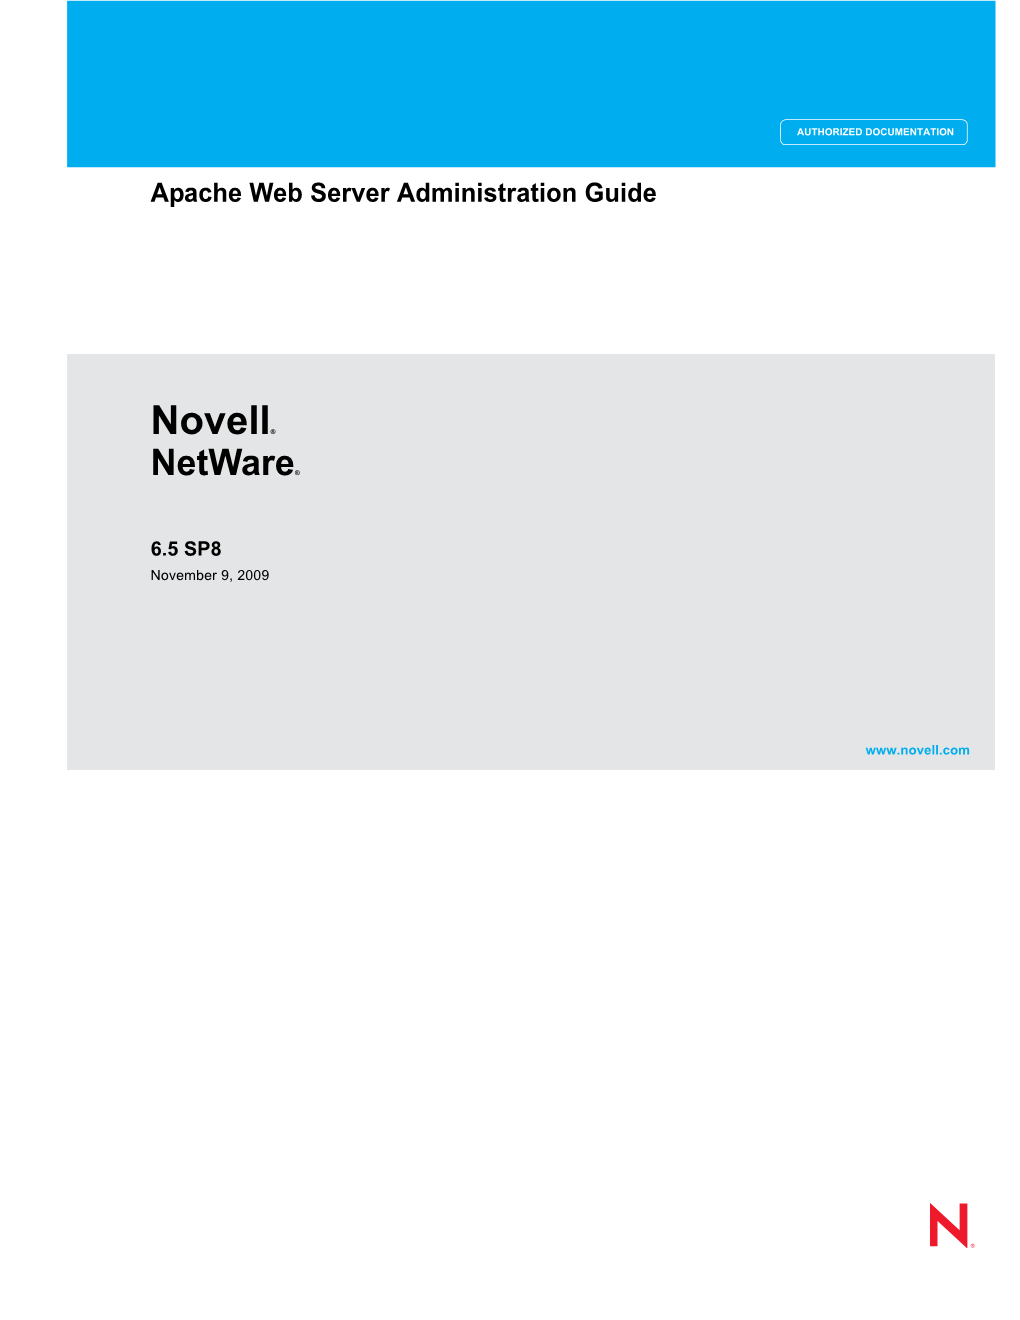 NW 6.5 SP8: Apache Web Server Administration Guide Novdocx (En) 17 September 2009 and One Or Rticular Purpose